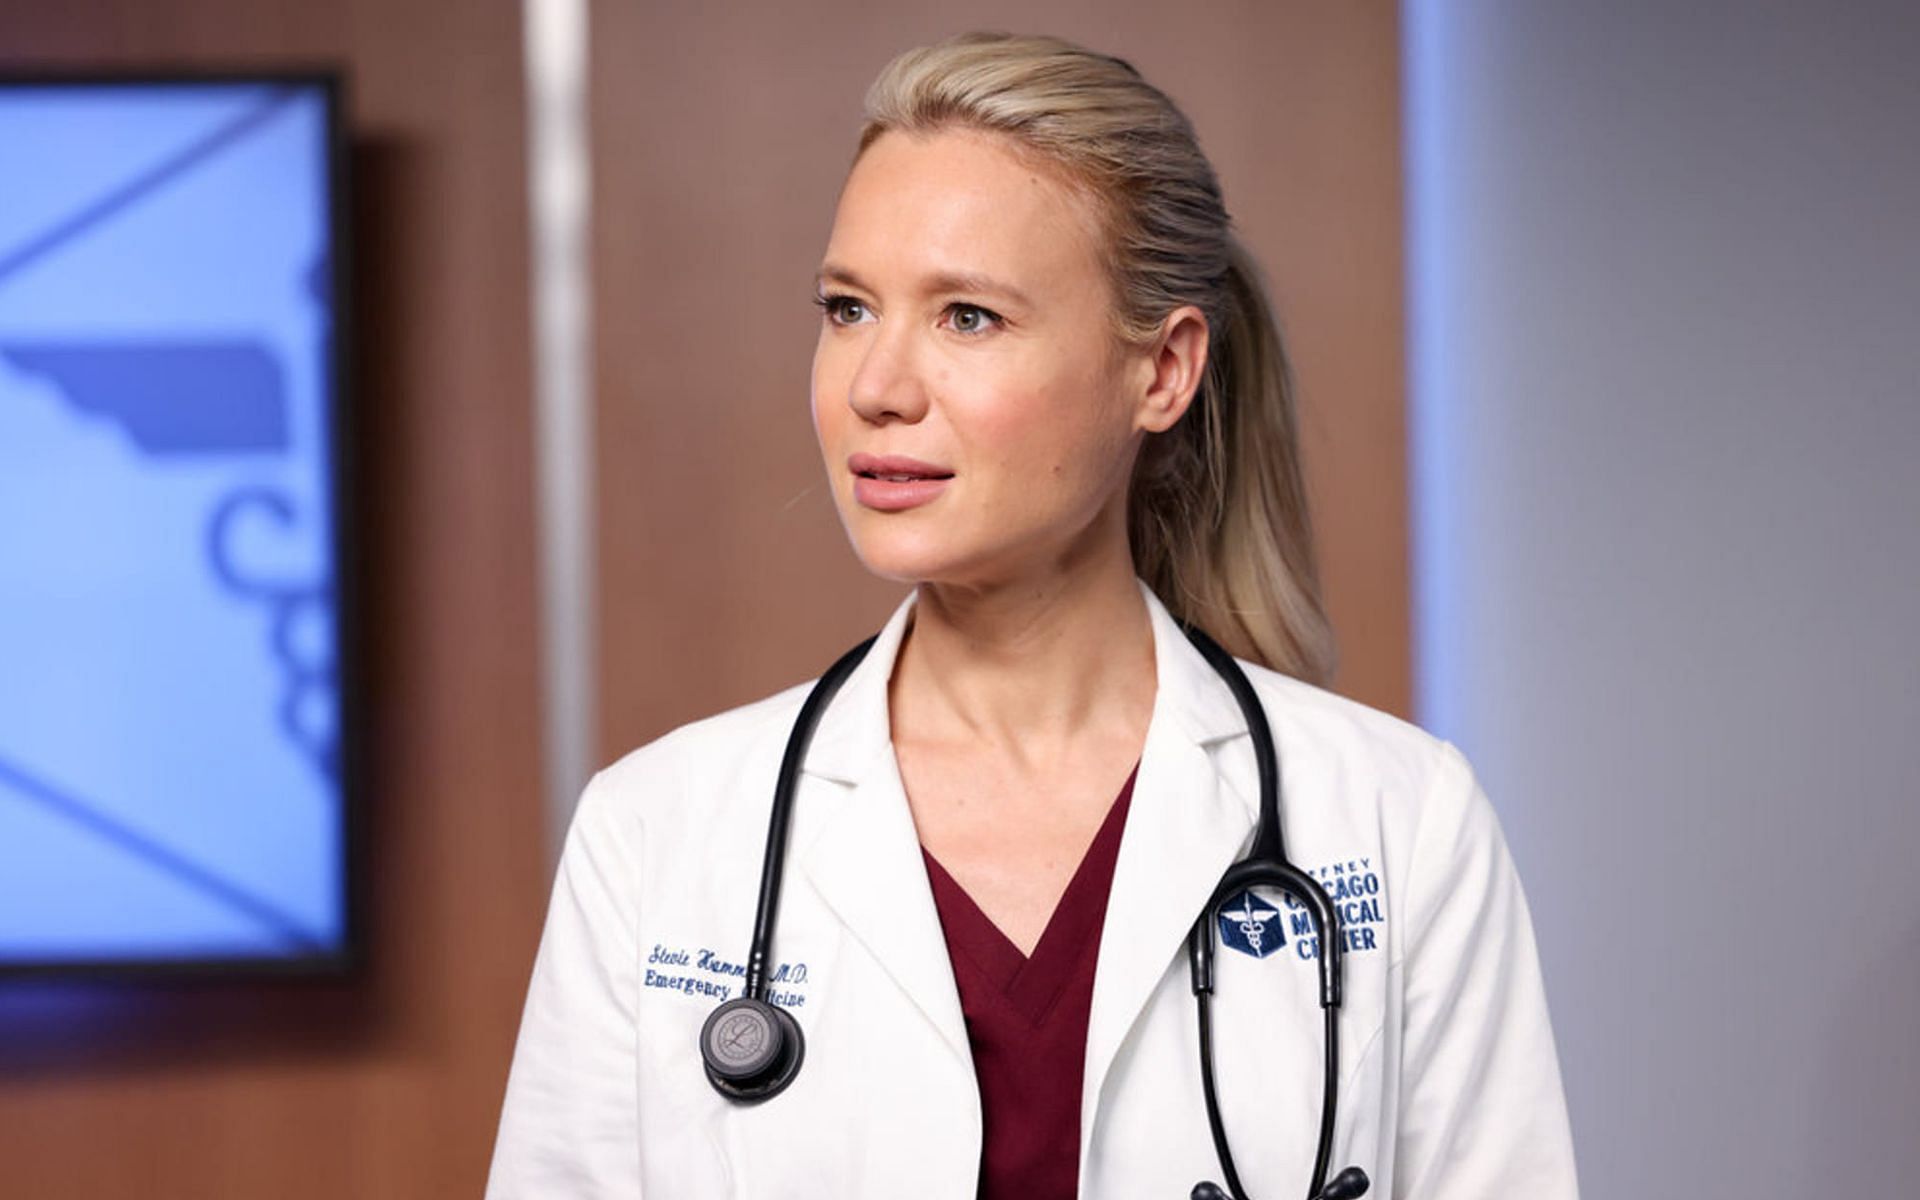 Kristen Hager is leaving the NBC medical drama Chicago Med (Image via YouTube/NBC)